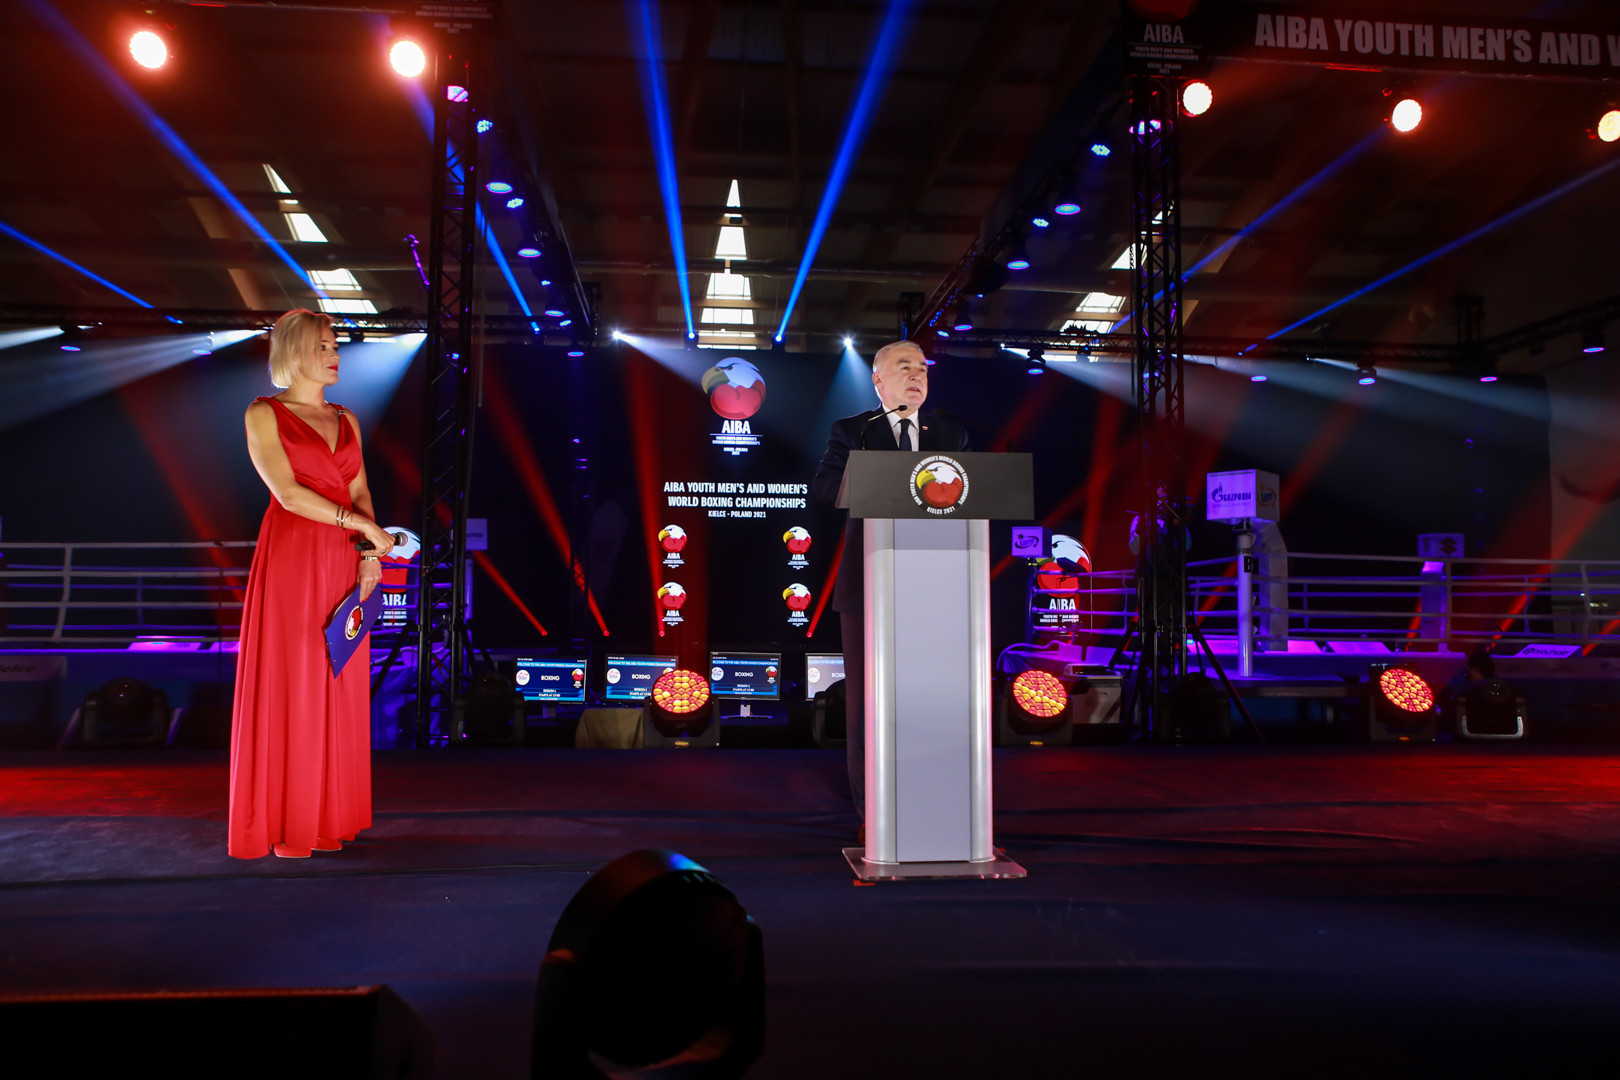 Poland's Sports Minister  Anna Krupka, left, and Polish Boxing Association President Grzegorz Nowaczek, right, were also among to take part in the Opening Ceremony ©AIBA